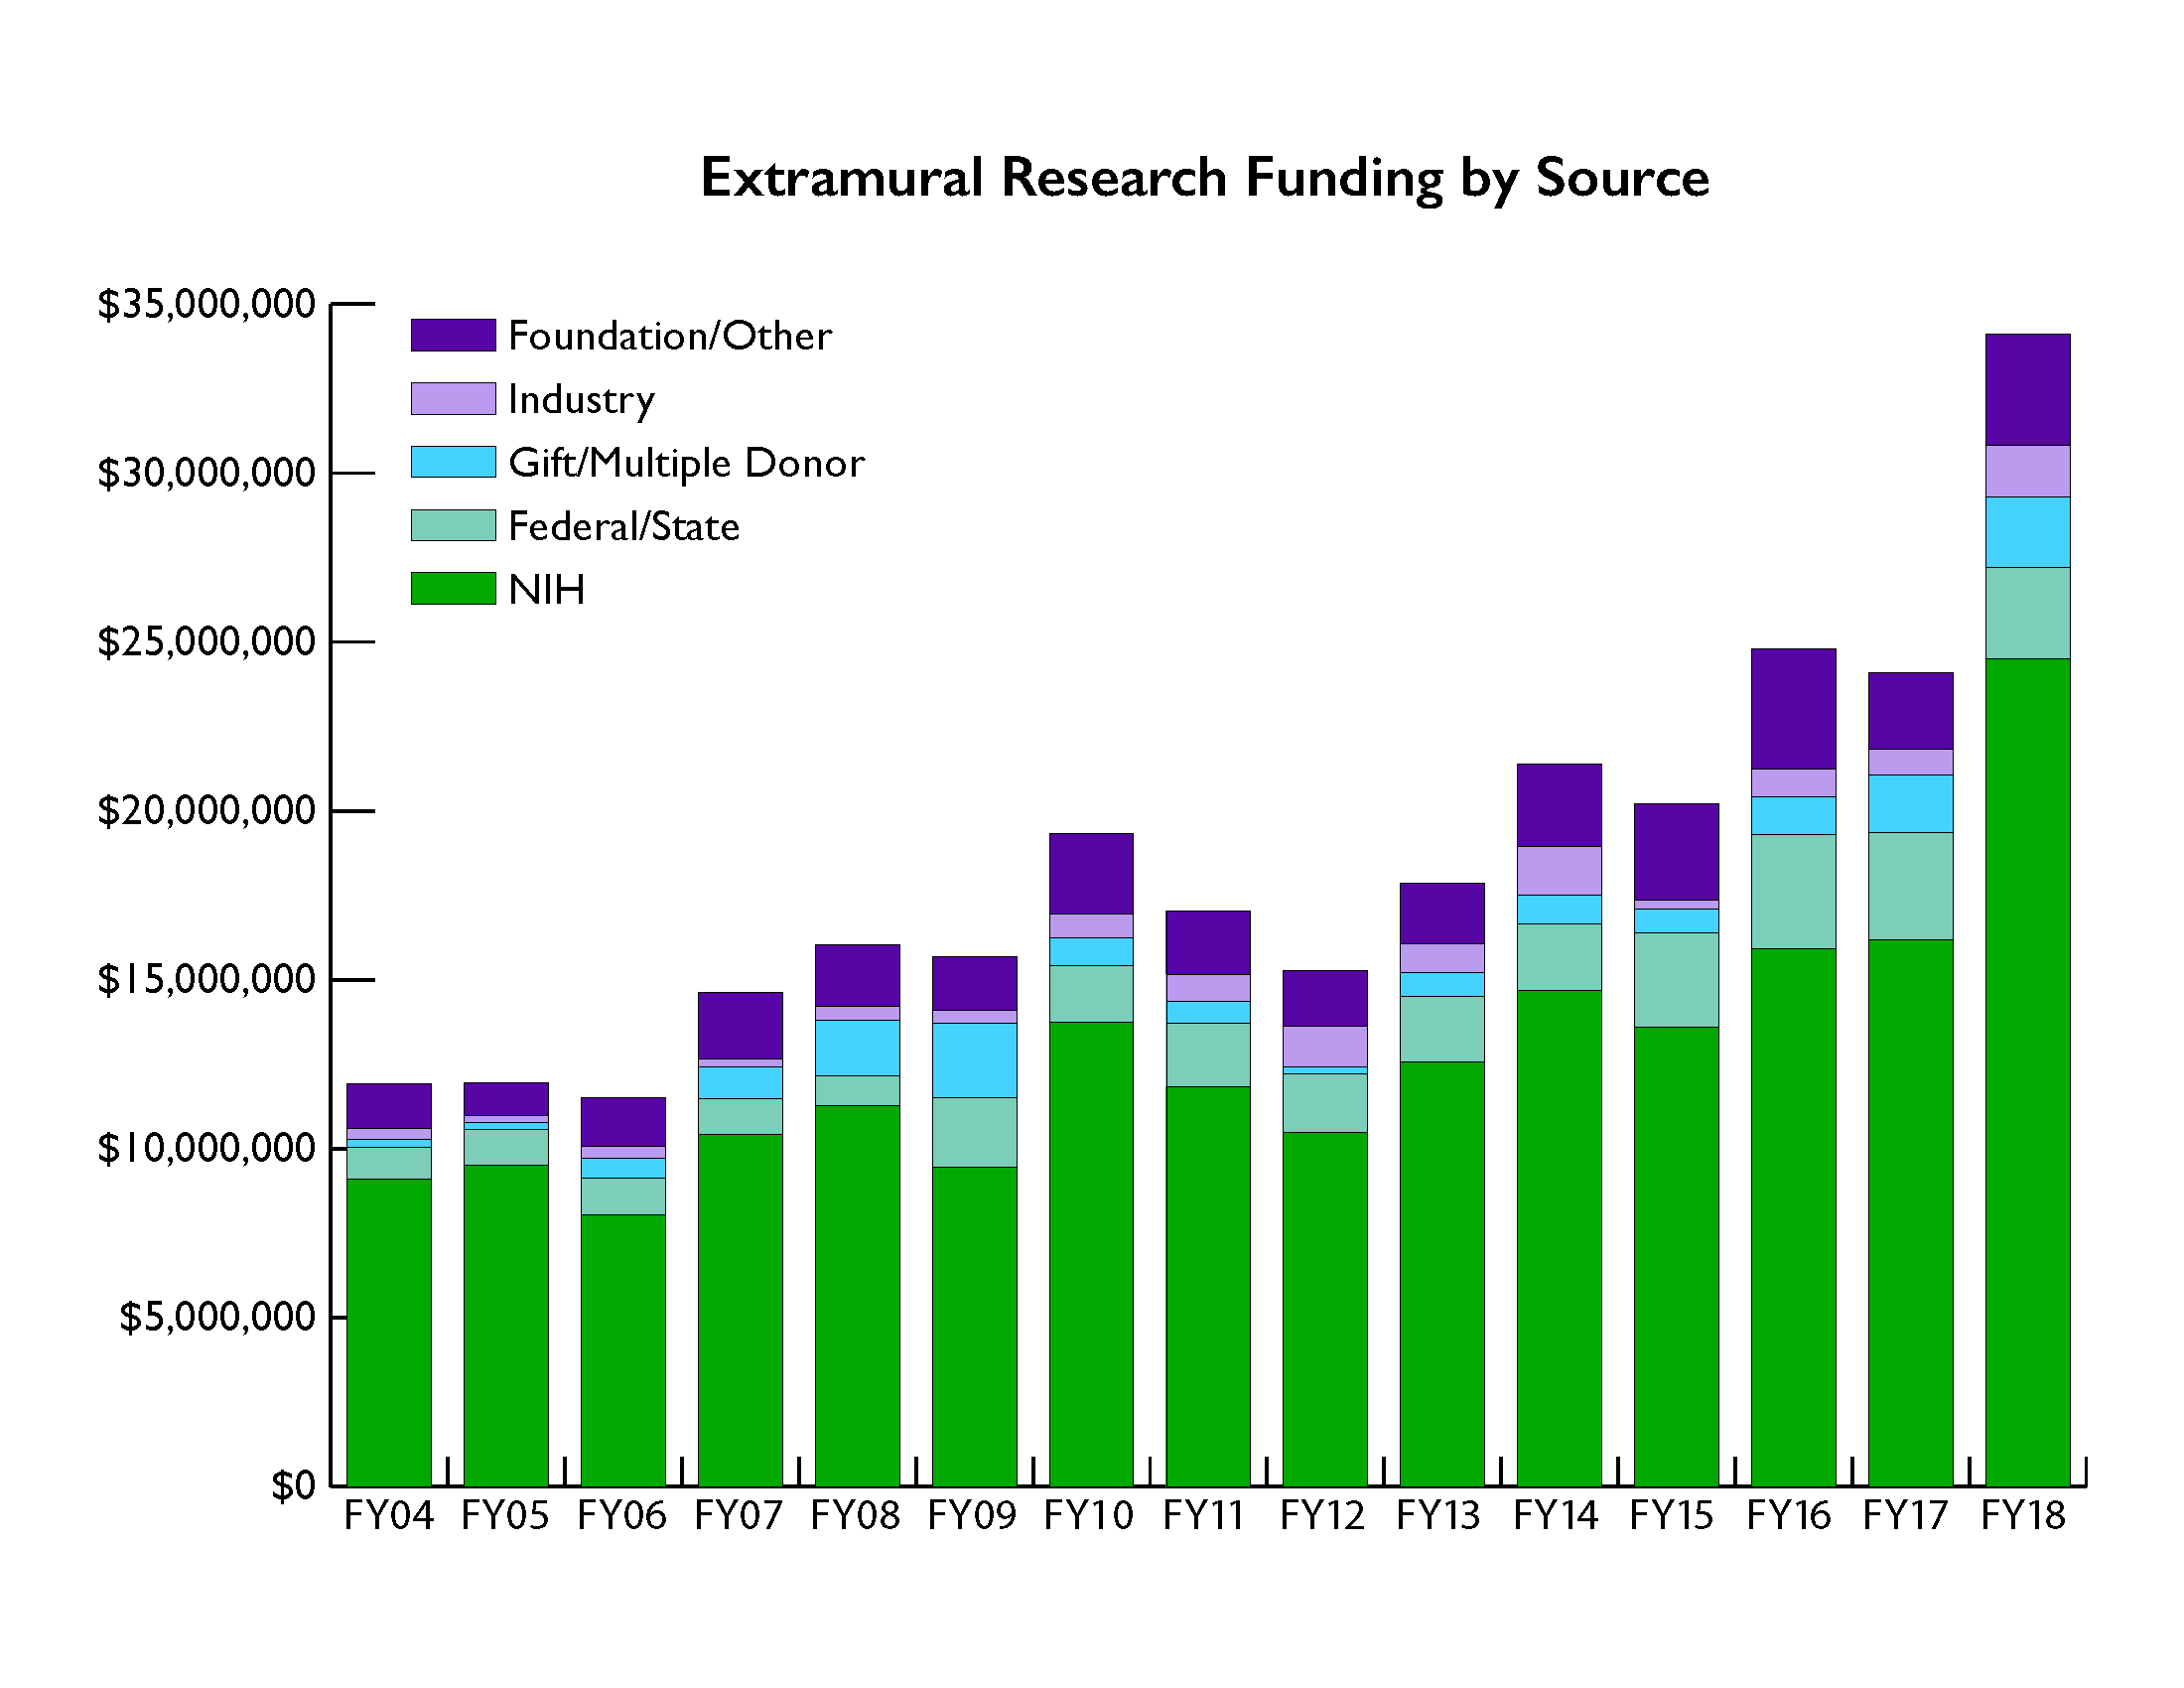 Extramural Research Funding by Source AR 2018